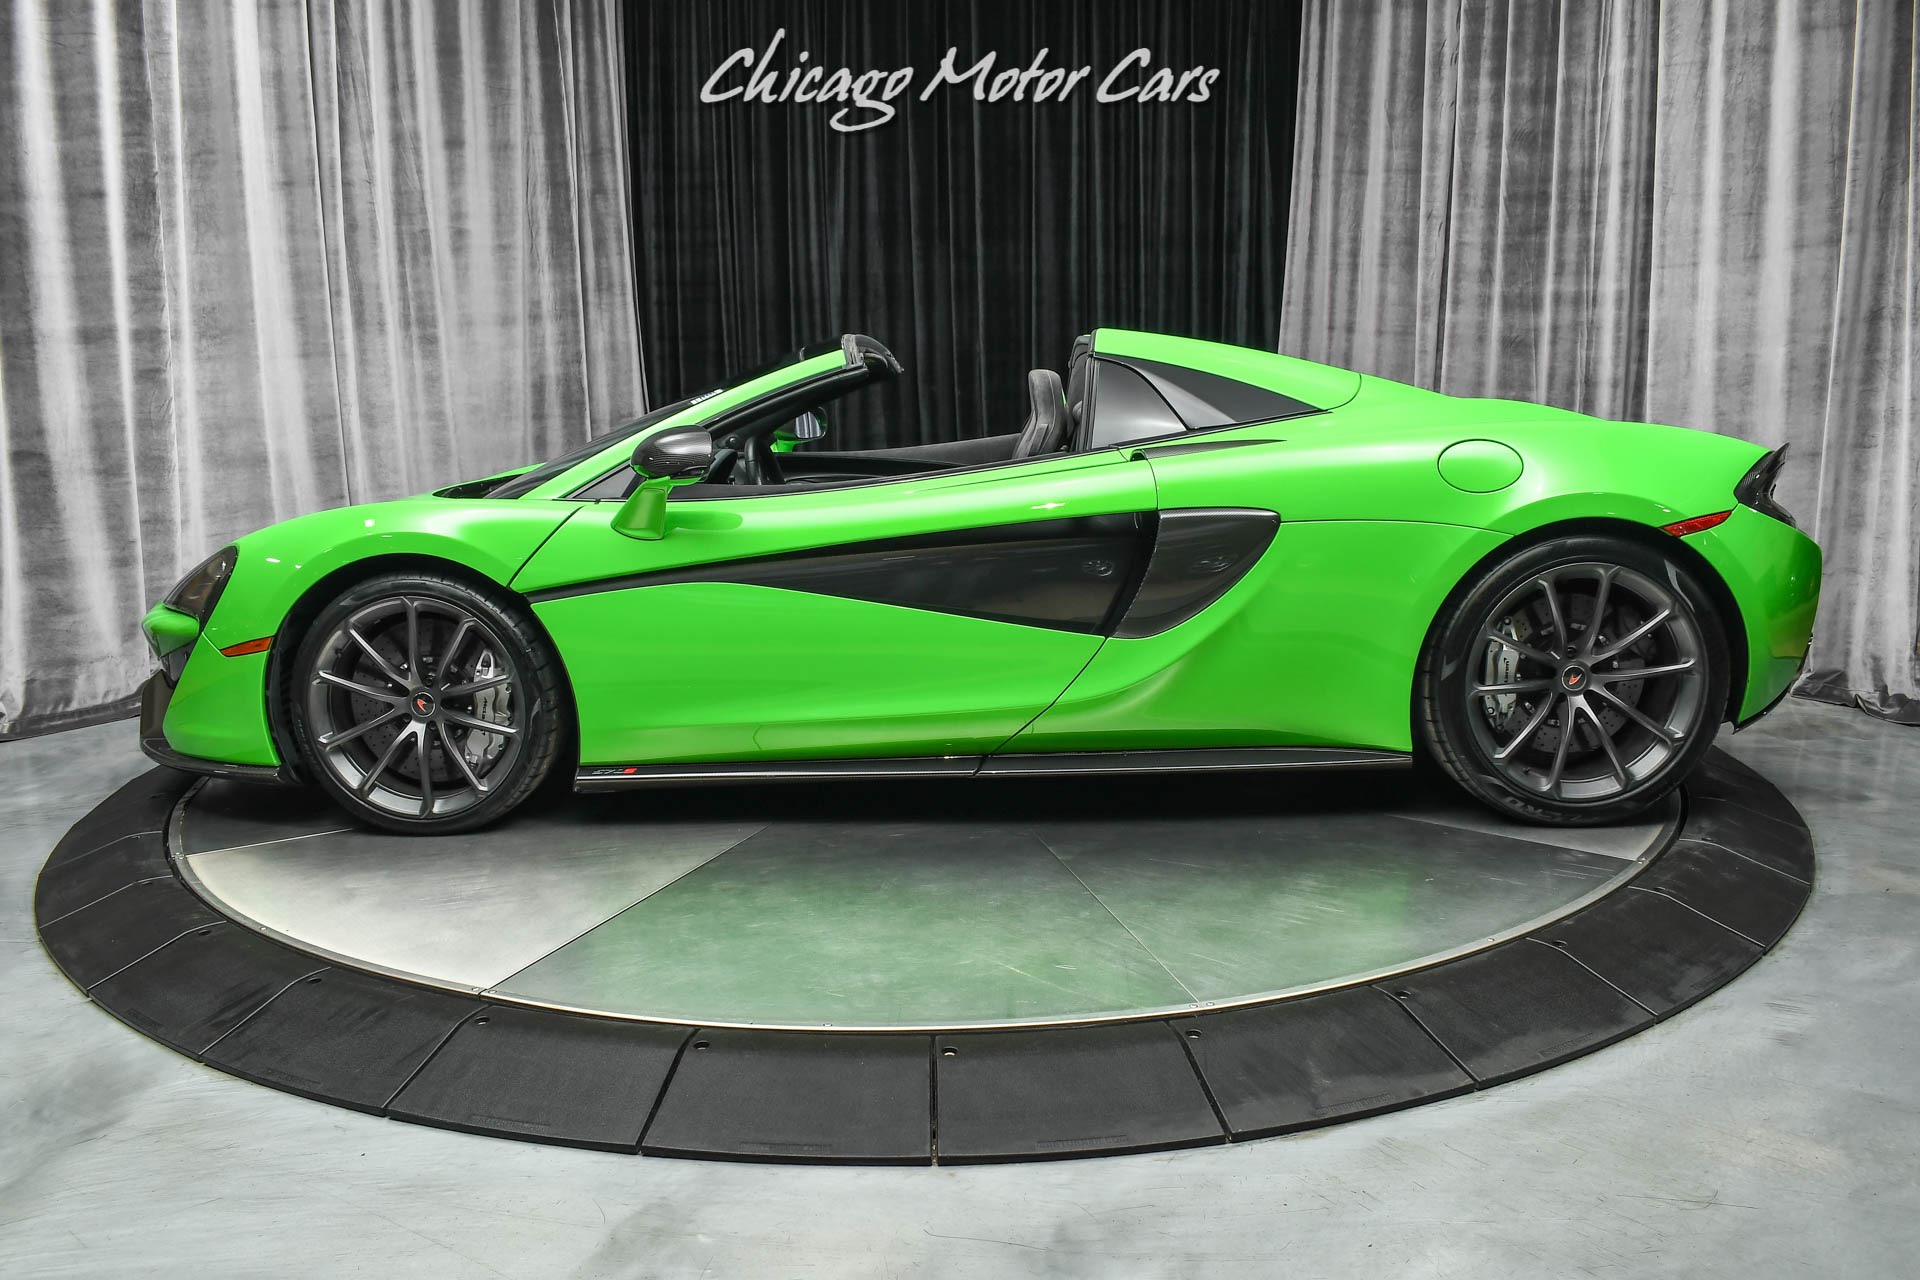 Used-2018-McLaren-570S-Spider-Convertible-Mantis-Green-Full-PPF-Low-MIles-60K-in-Options-LOADED